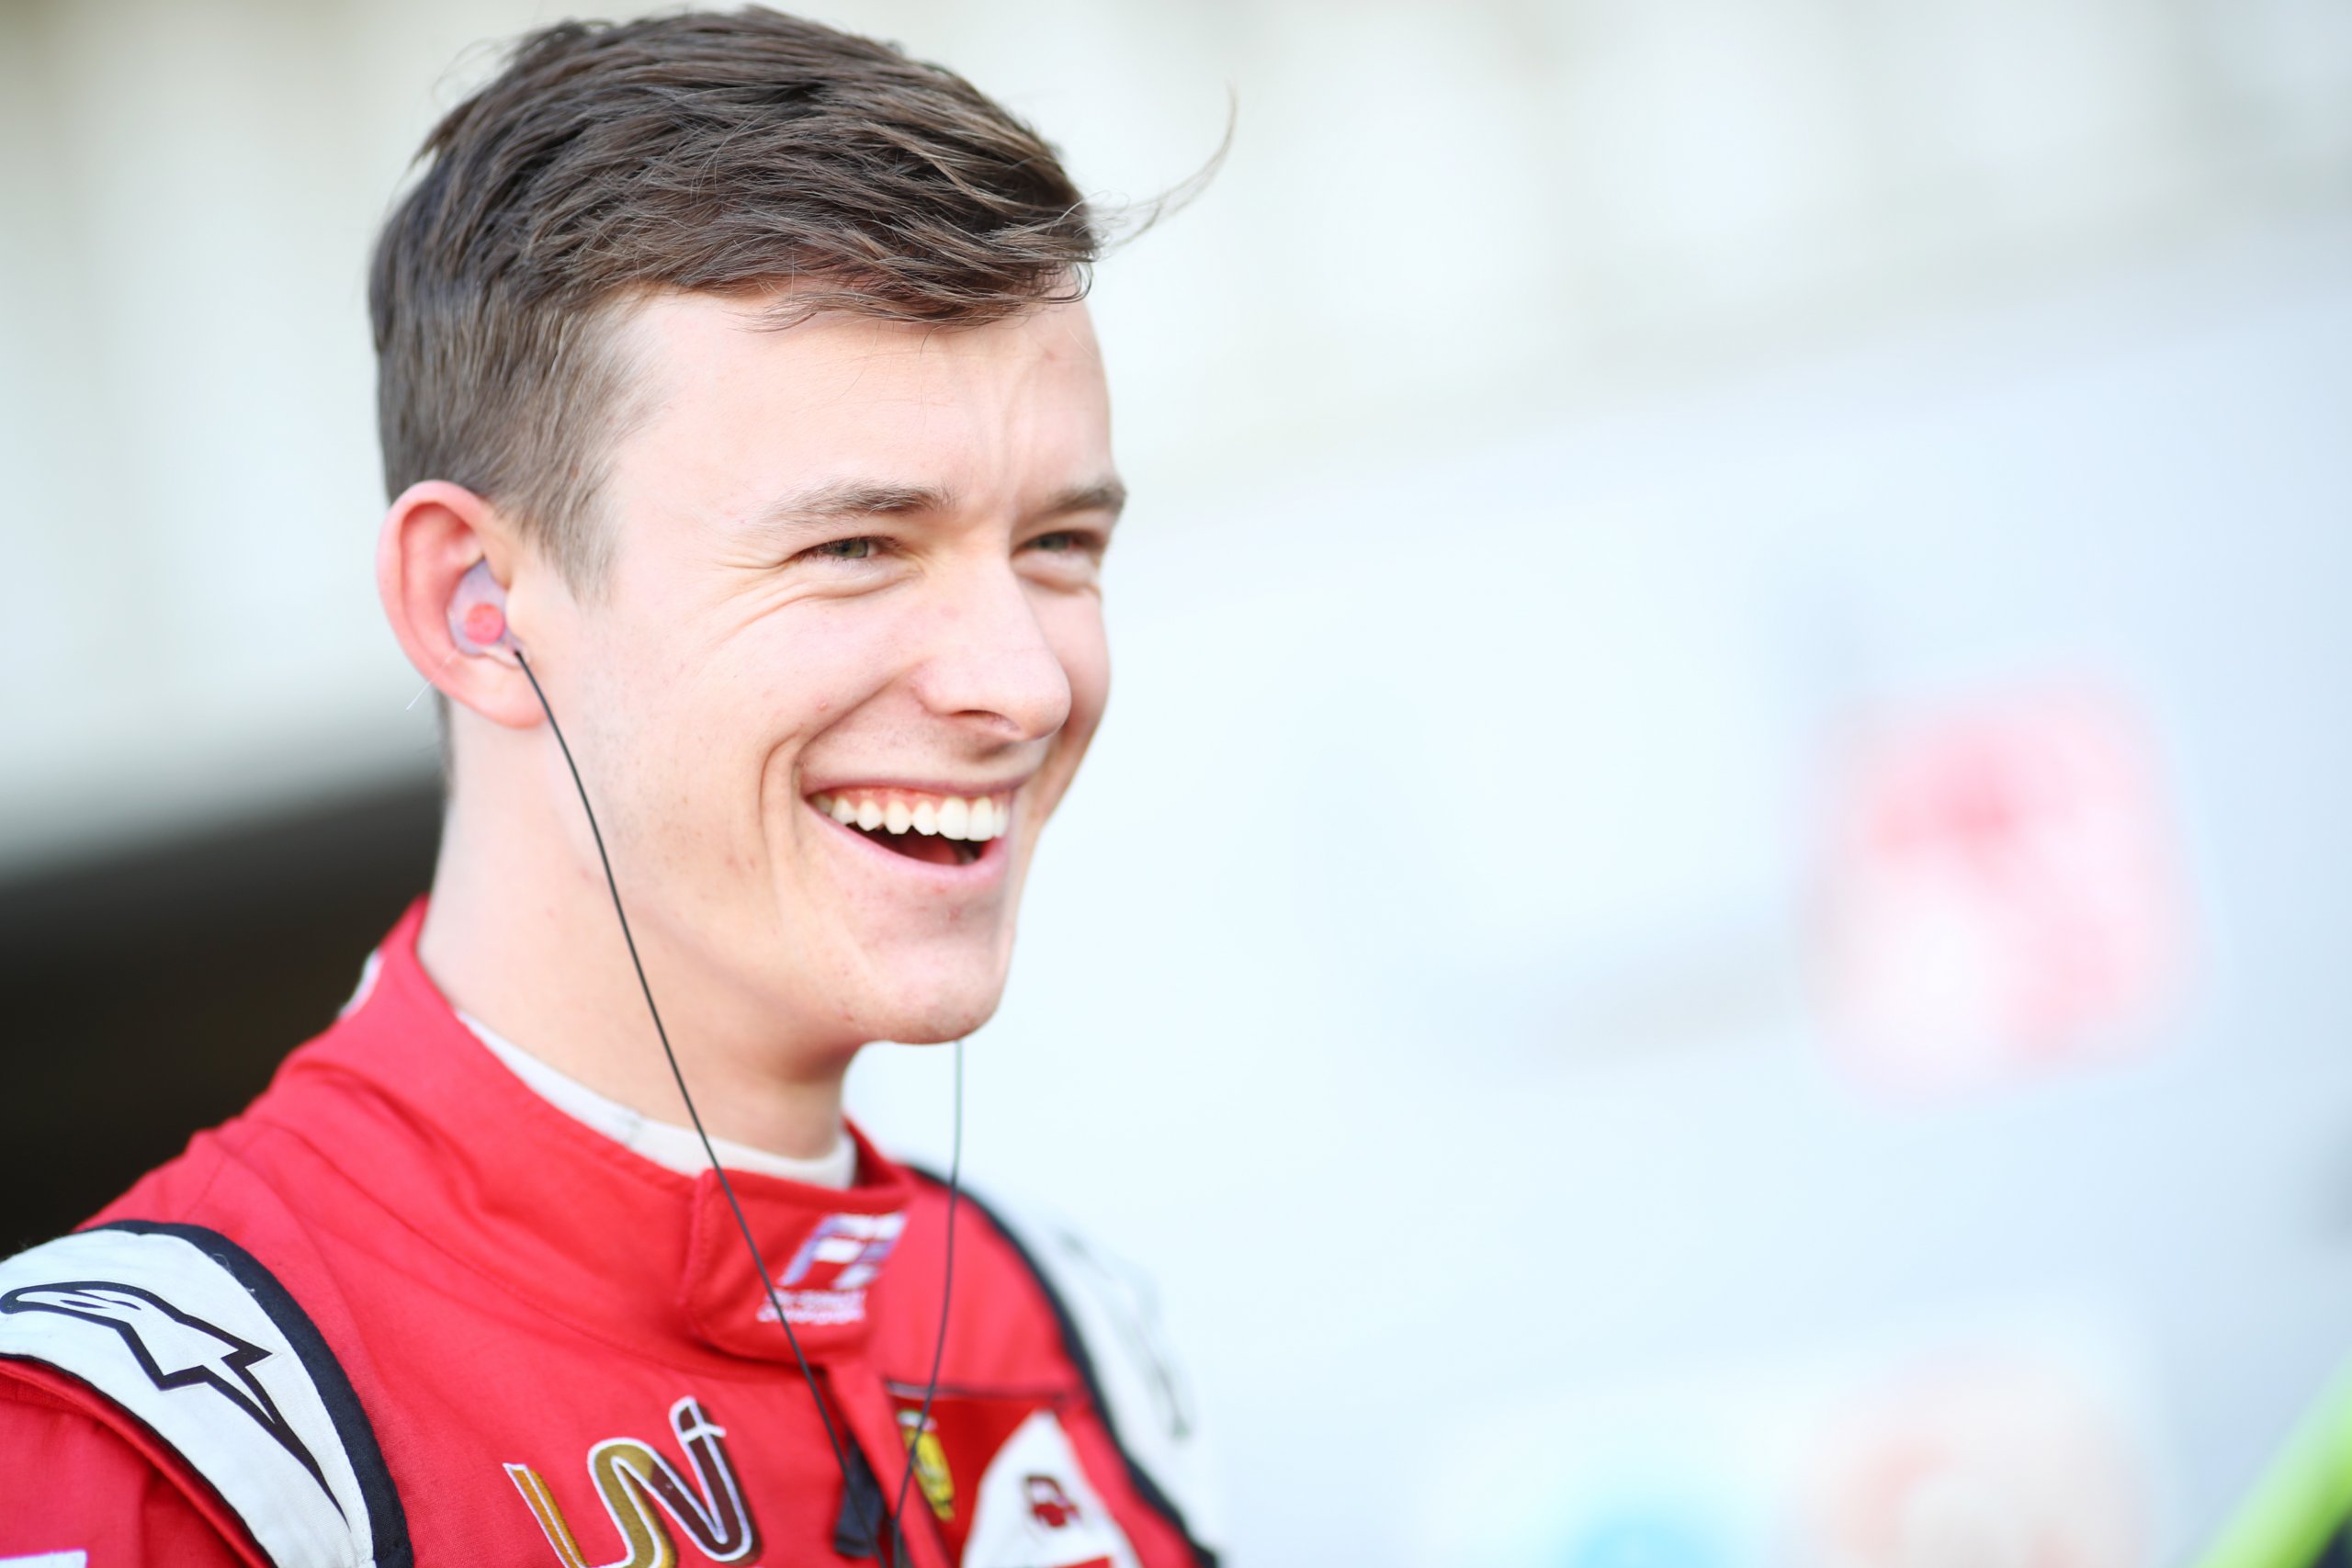 Callum Ilott is all smiles when he's listening to his Spotify playlist.